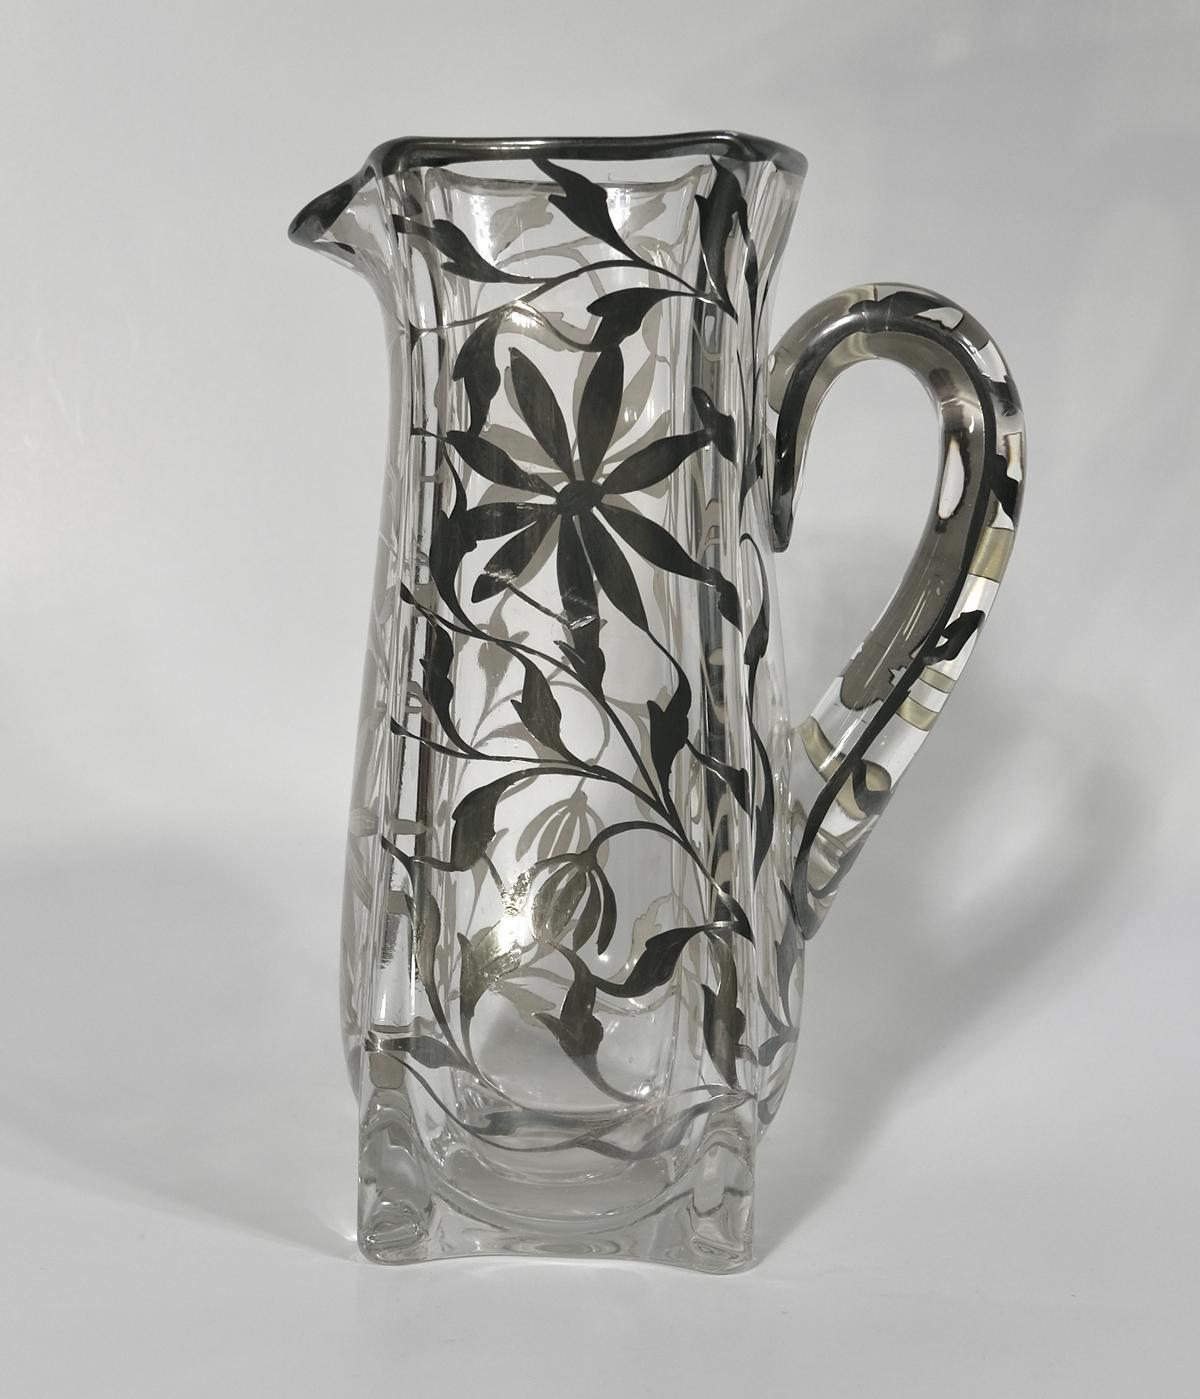 SILVER OVERLAY PITCHER